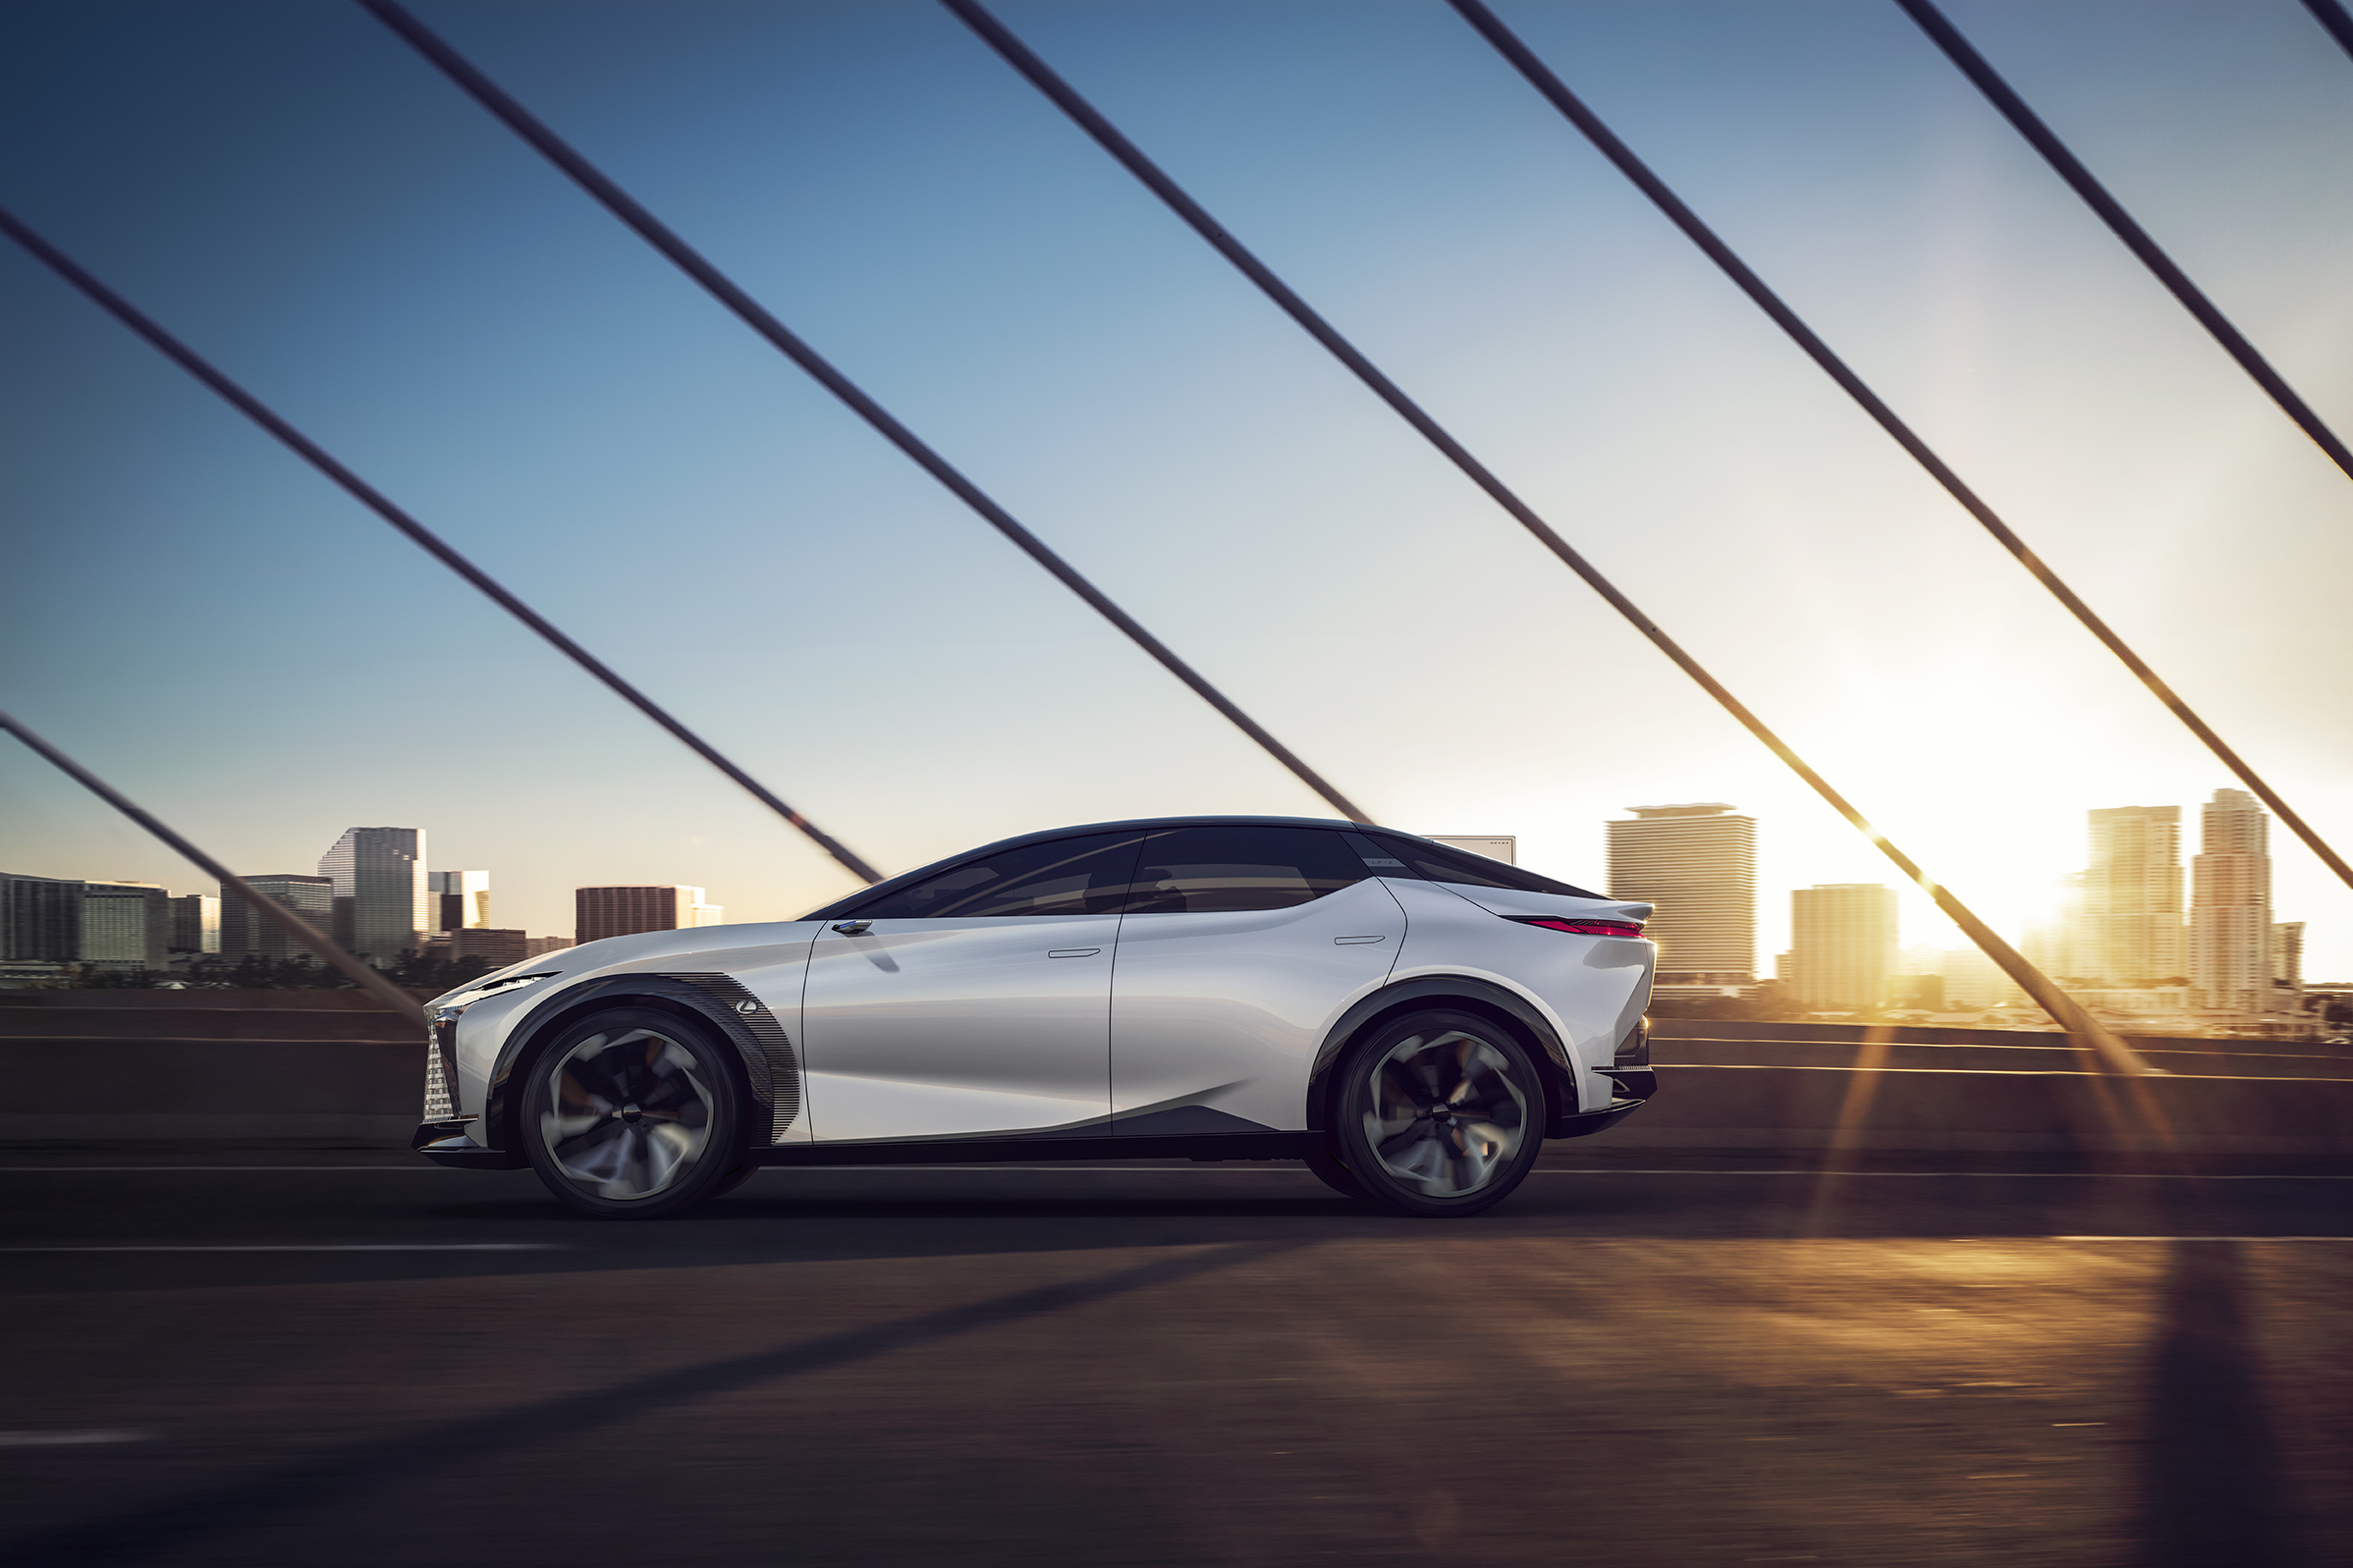 Lexus unveils electric SUV concept that is 'symbolic' of its next